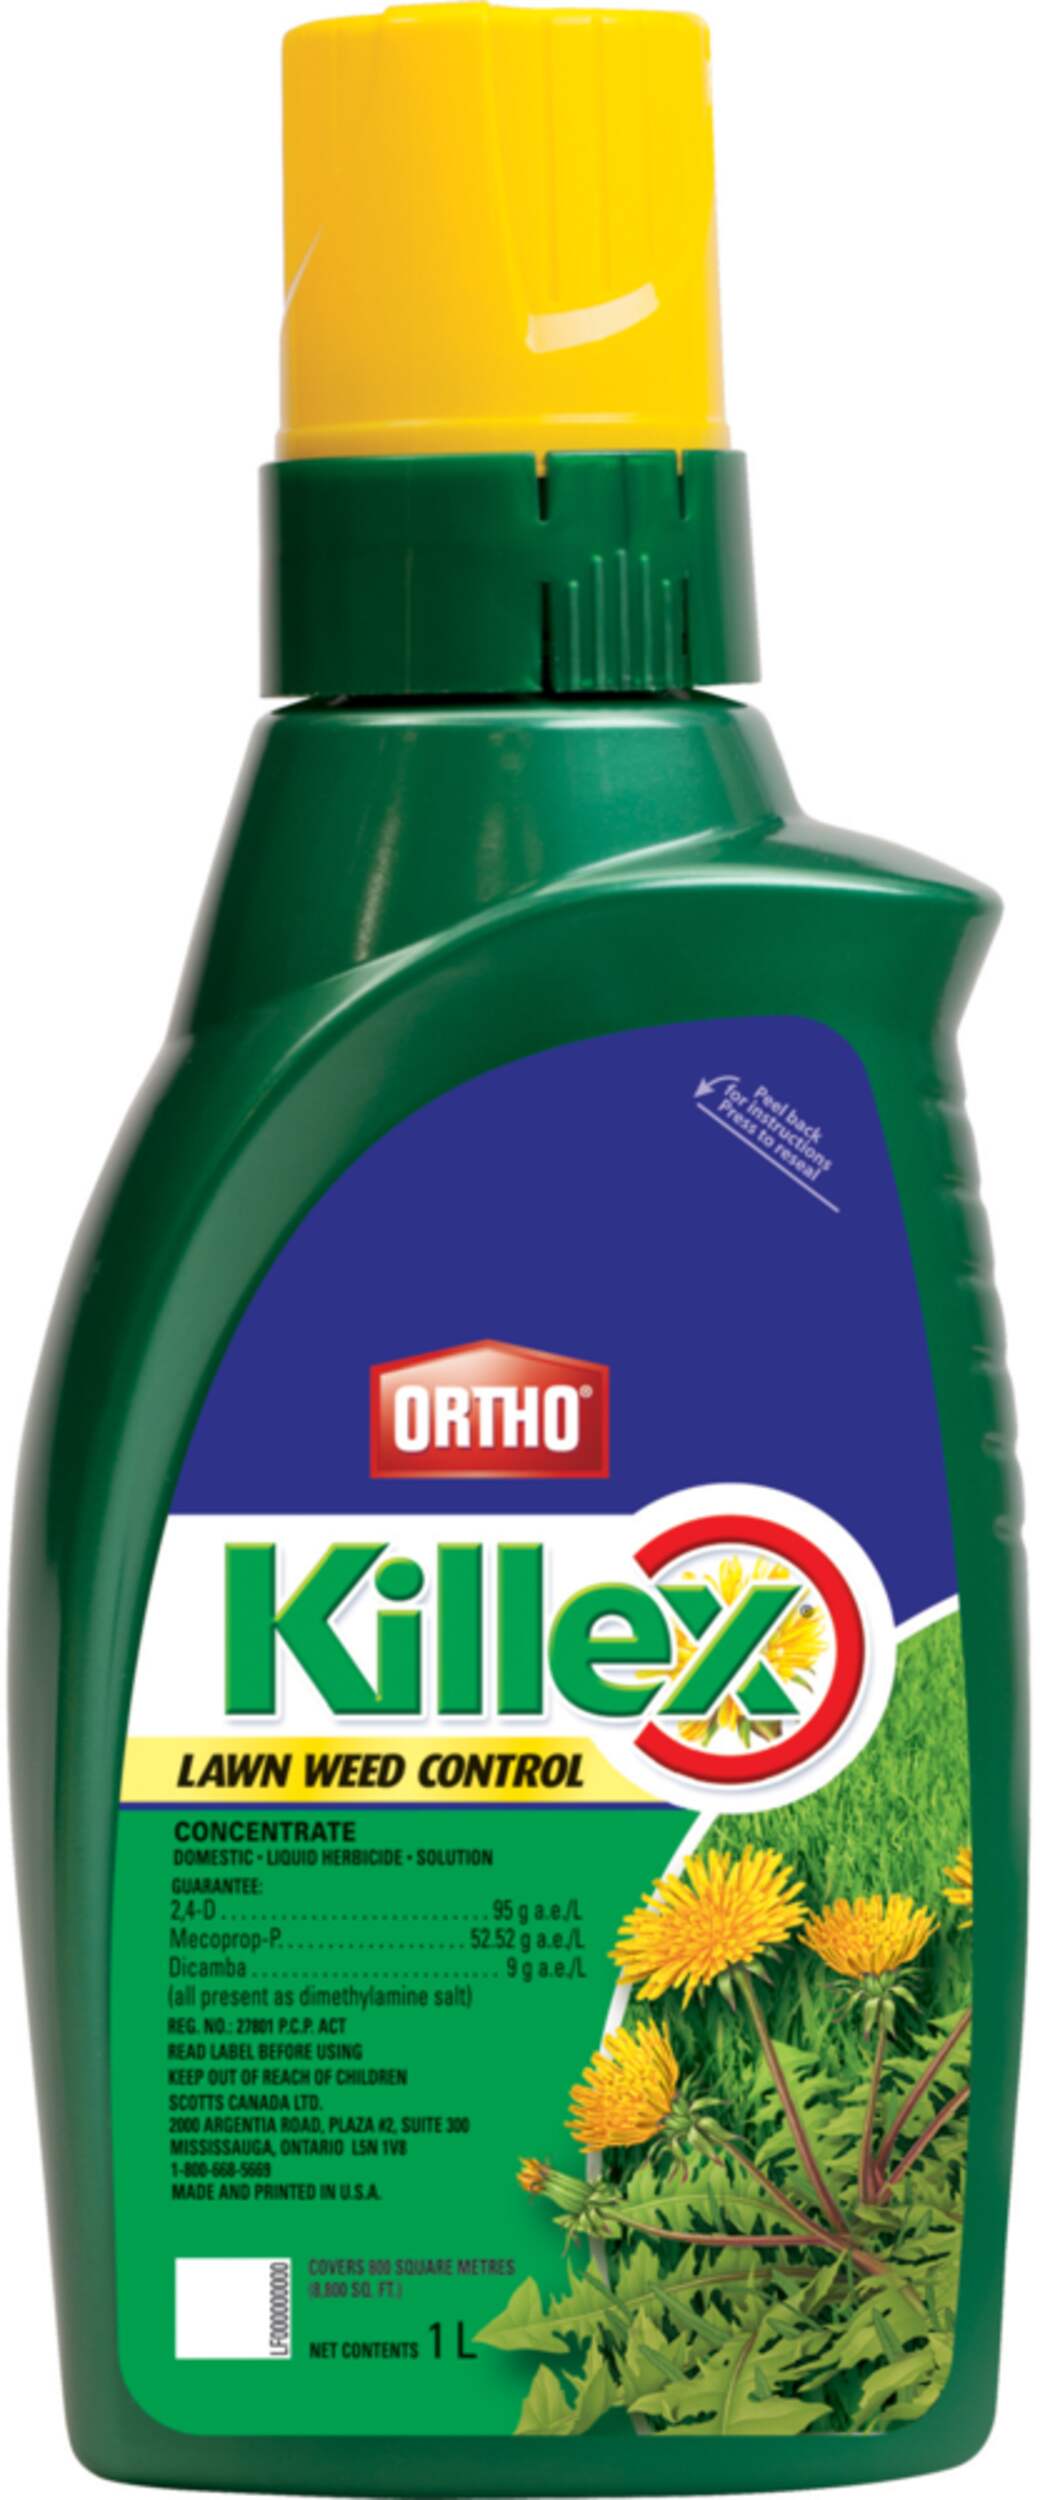 Ortho Killex Lawn Weed Killer Concentrate 1L